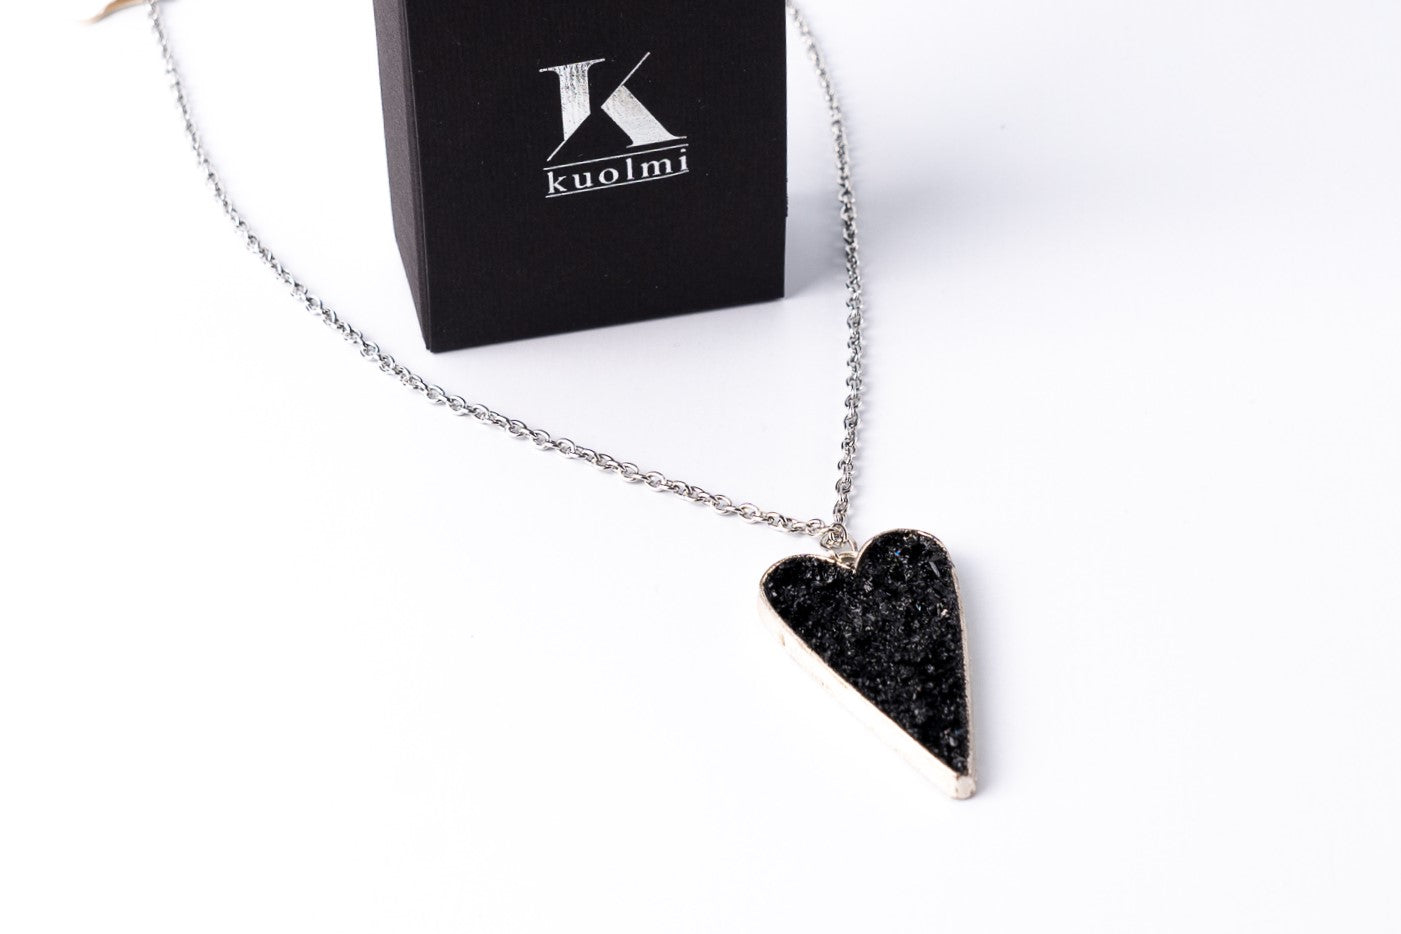 This awesome necklace is a mix of three styles: gentle timeless elegance, edgy steampunk, and classic rocker touch. It gives your outfit the right amount of emotions, elegance end edge. A perfect combination of heart softness, elegant stainless steel chains, and raw organically shaped natural coal… create a statement piece for various occasions.